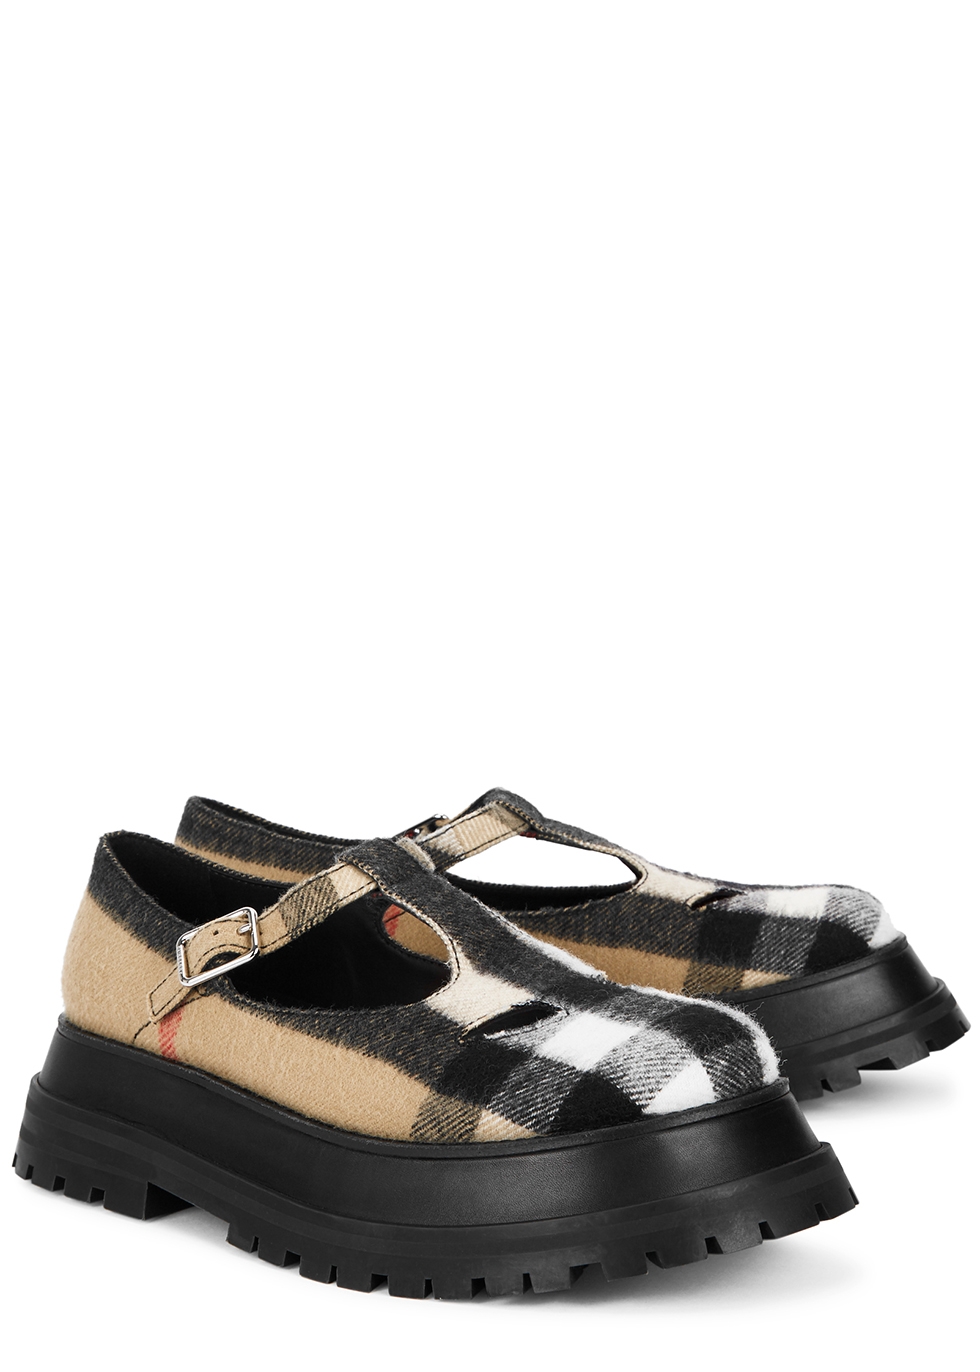 burberry mary jane shoes